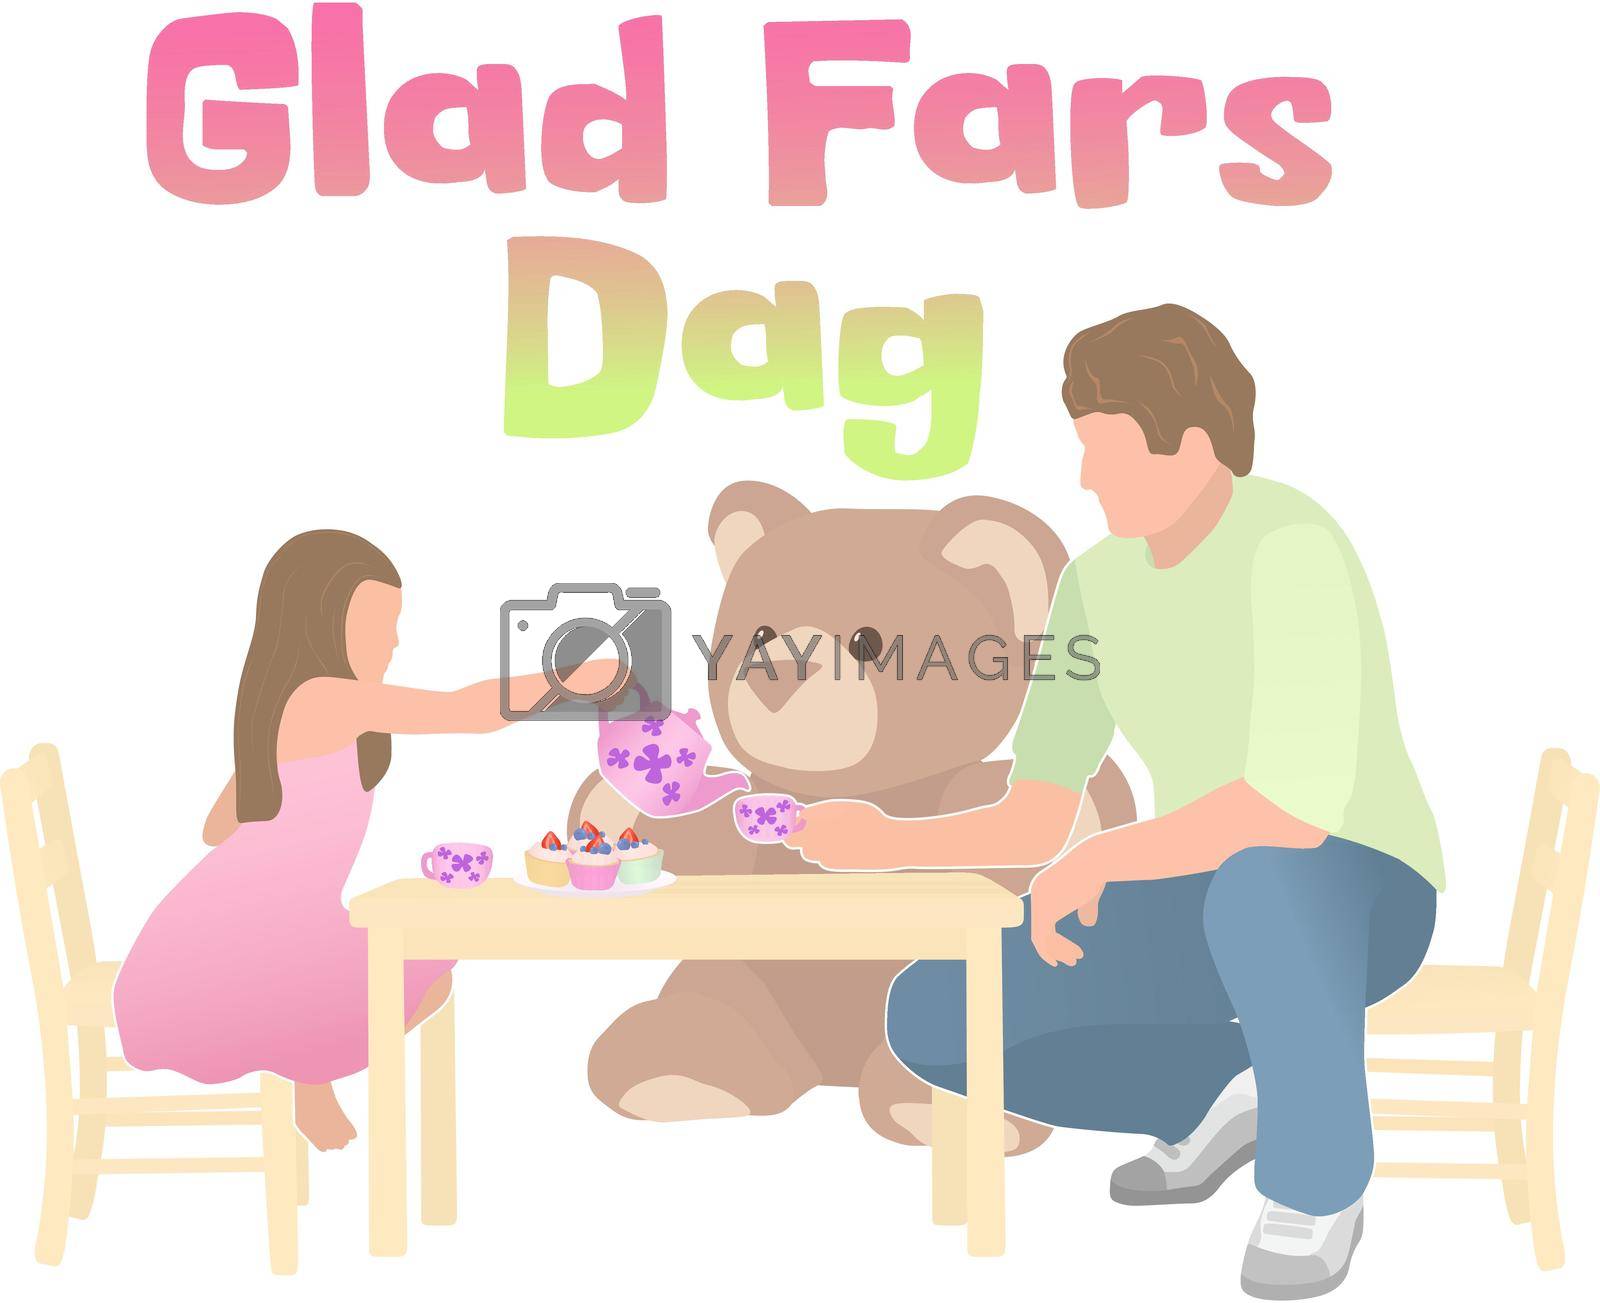 Glad Fars Dag - Translation is Happy Father s Day. Public holiday of Denmark. Suitable for greeting card, poster and banner.